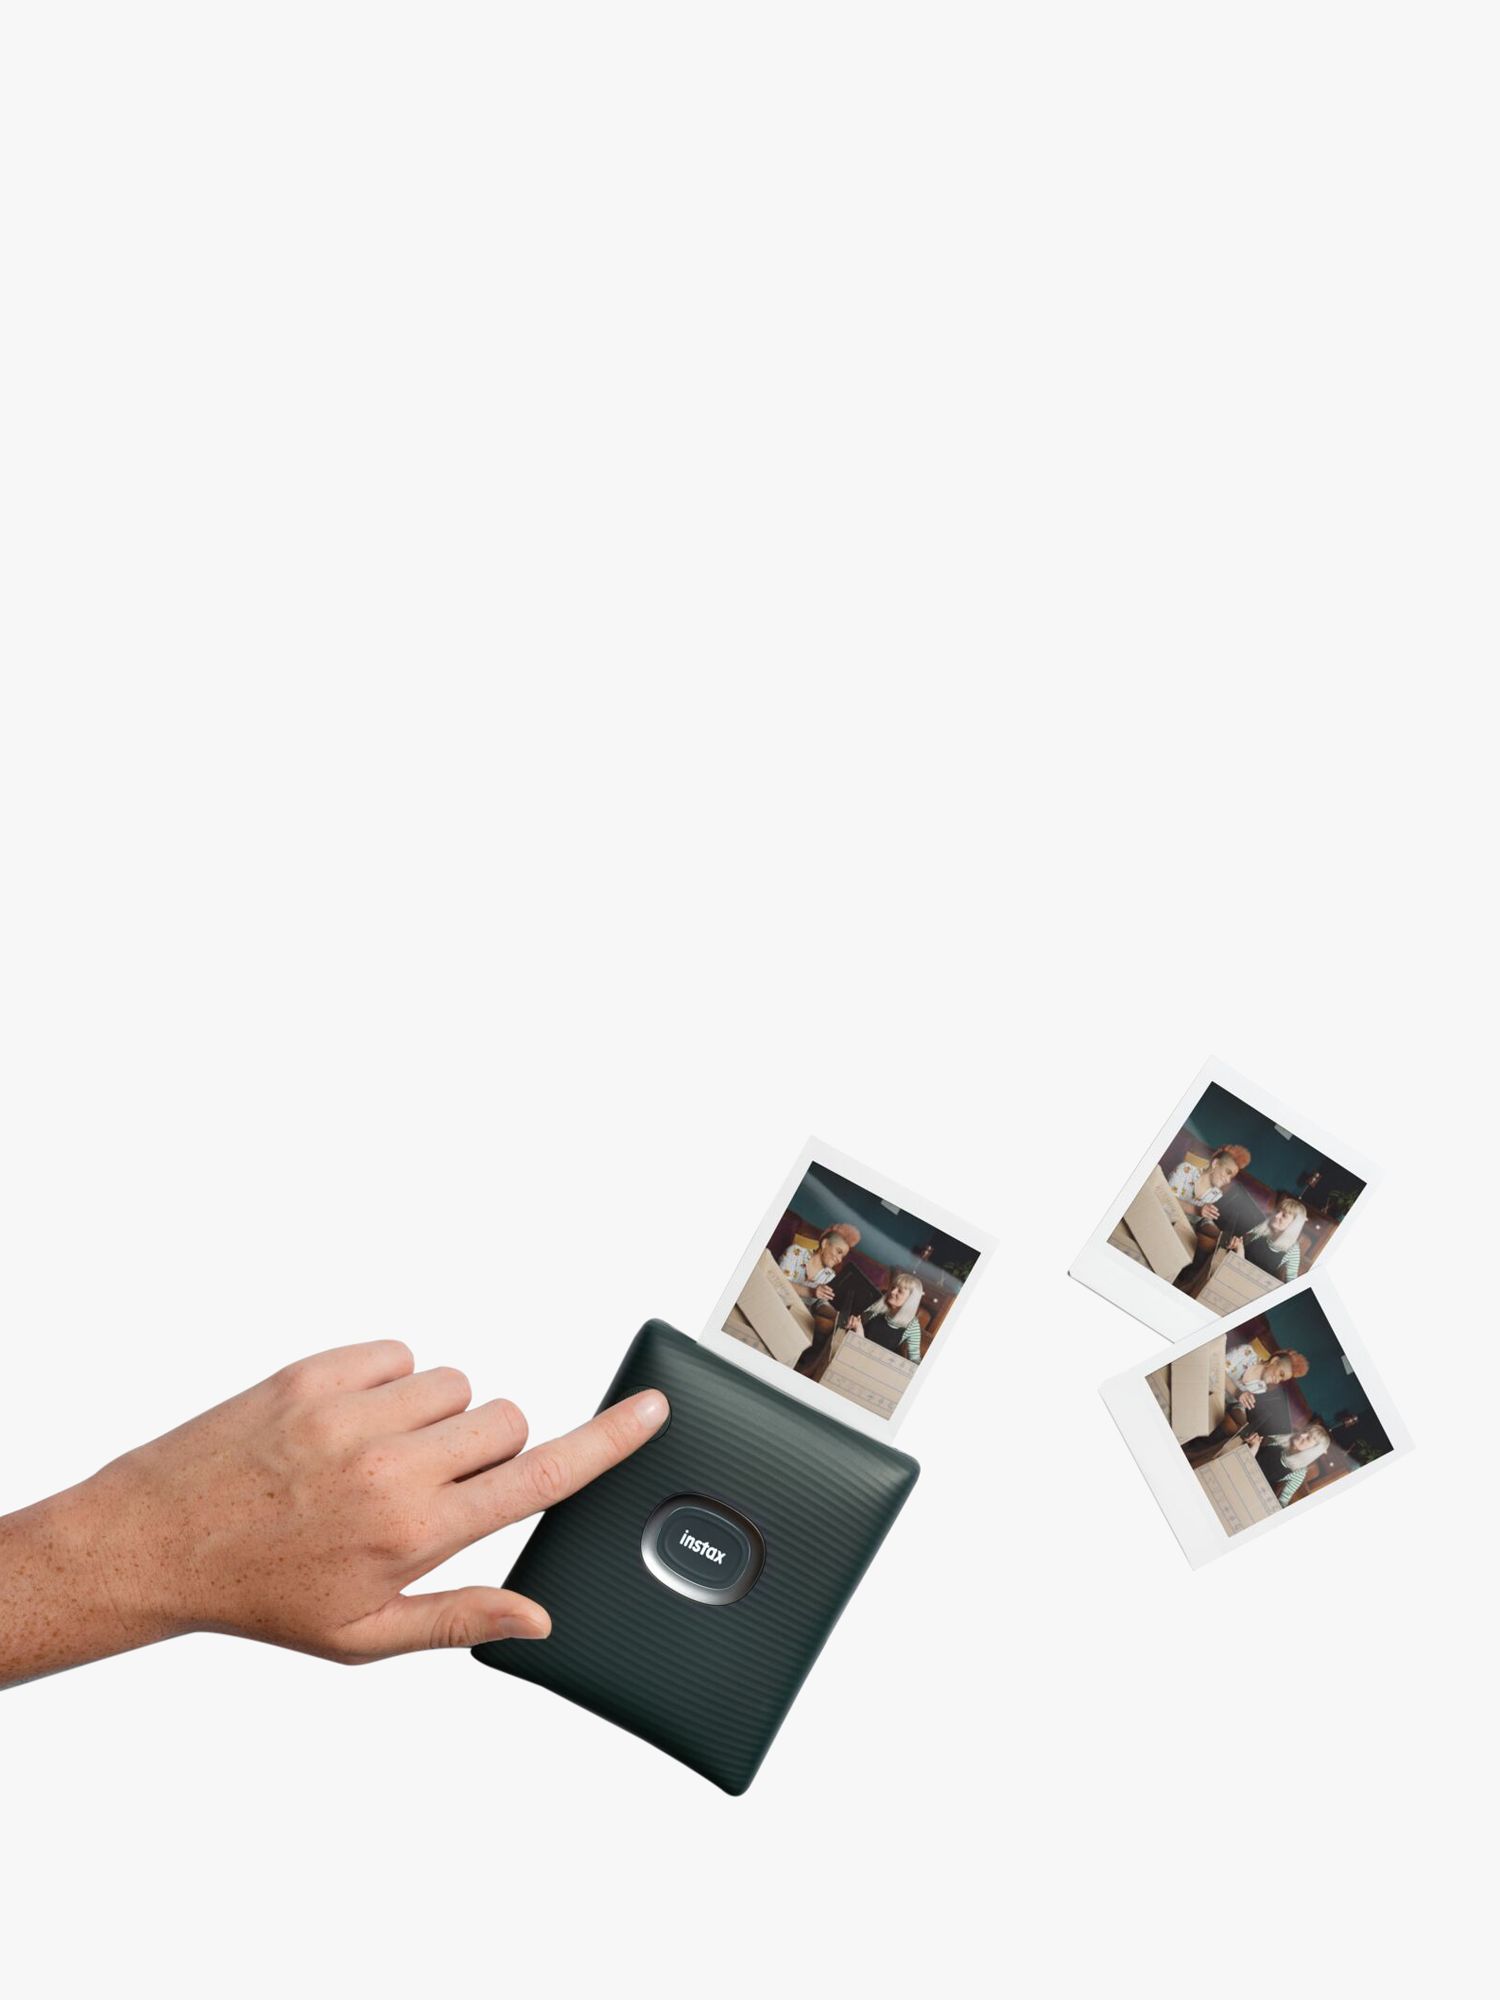 INSTAX SQUARE Link - INSTAX by Fujifilm (UK)